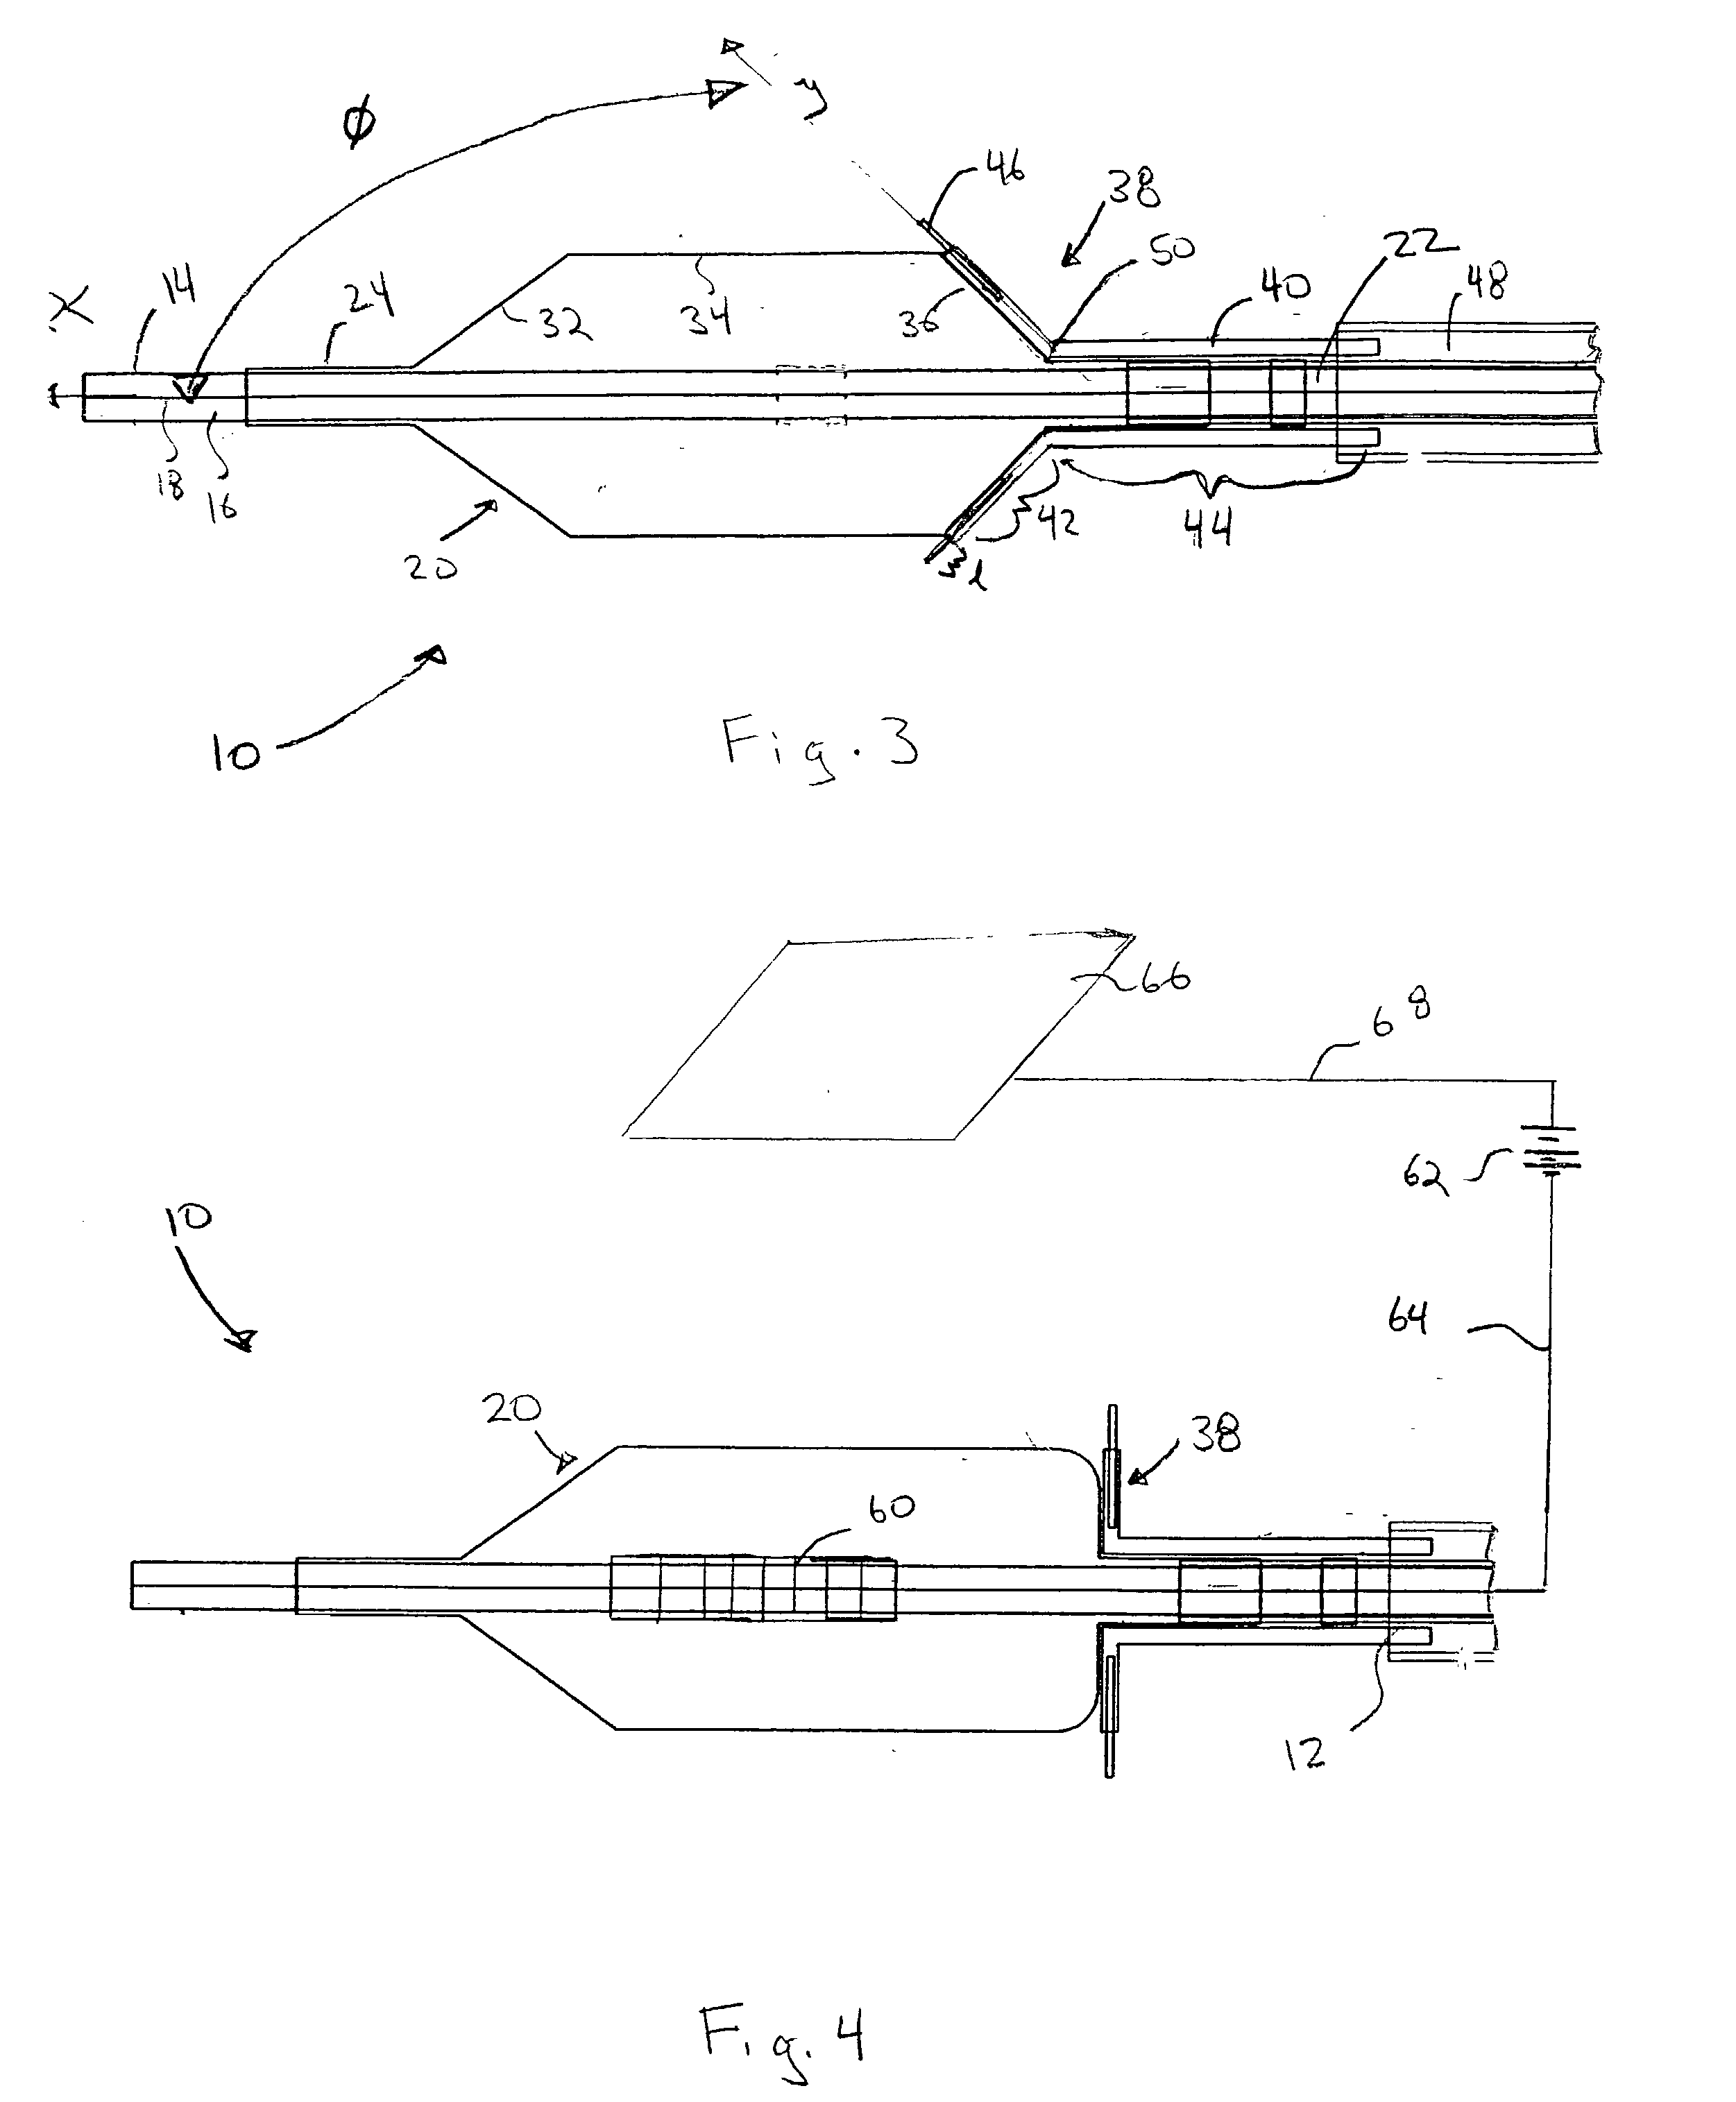 Substance delivery apparatus and a method of delivering a therapeutic substance to an anatomical passageway